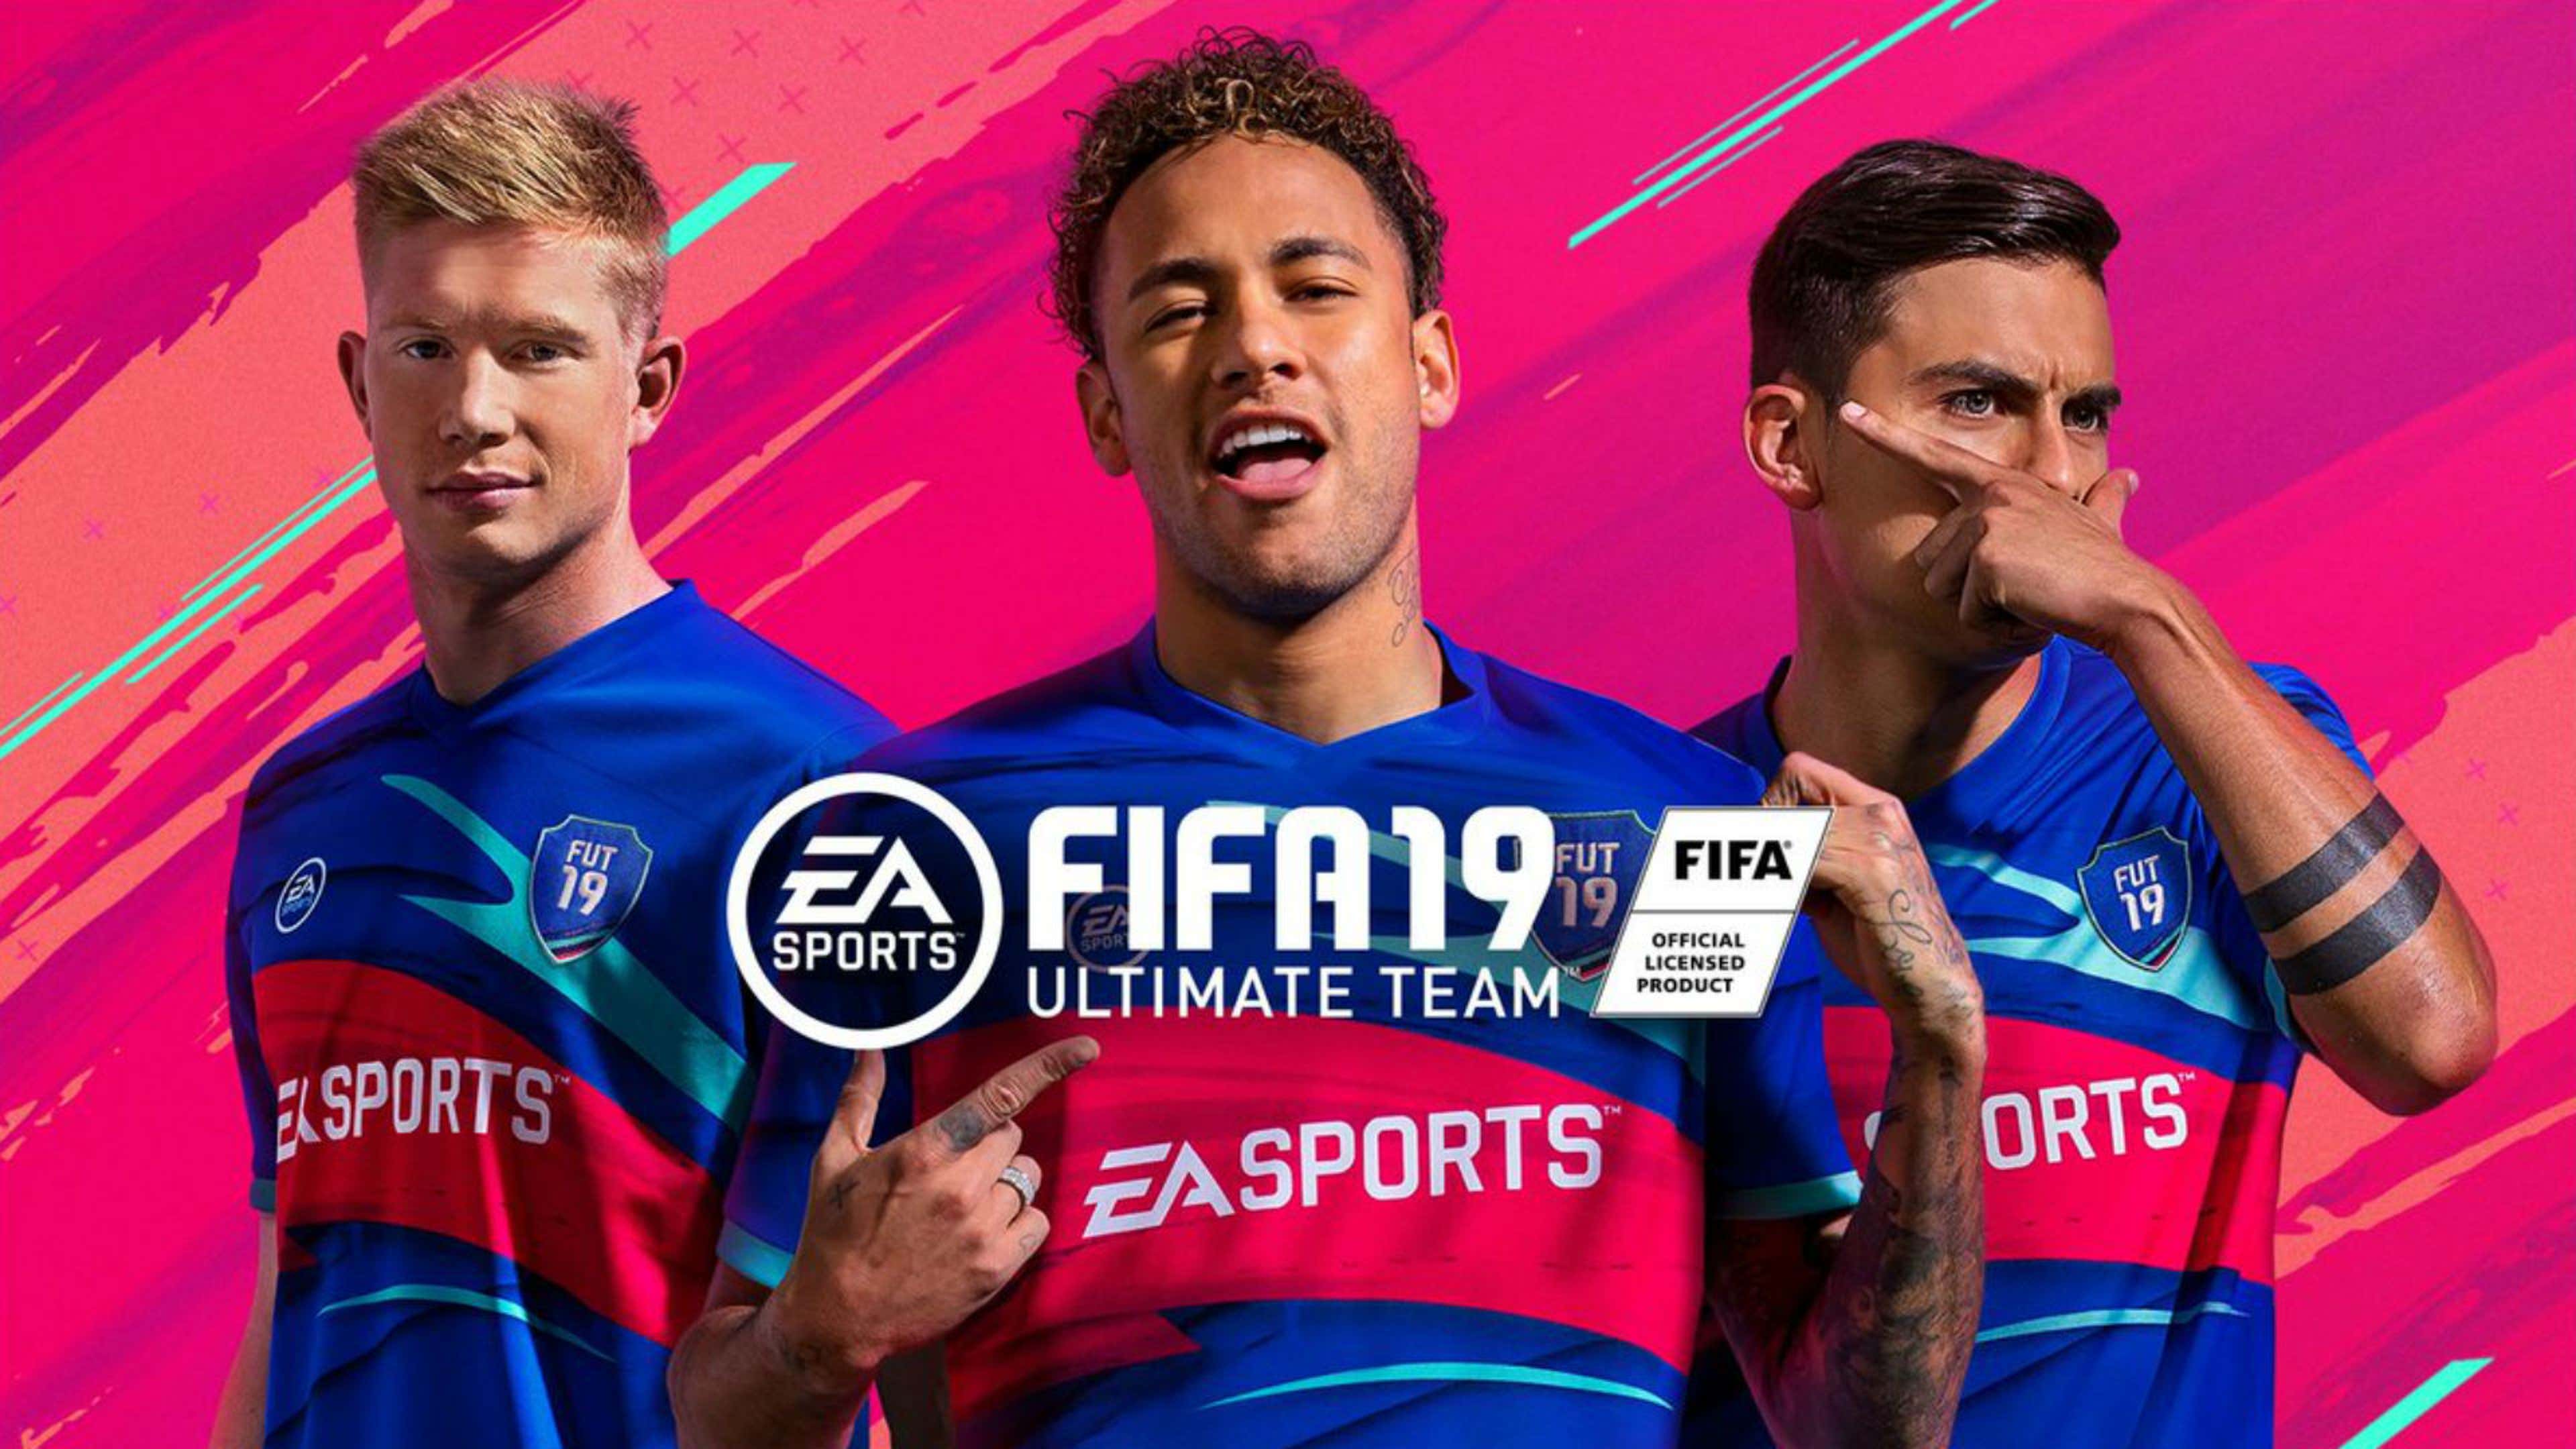 Fifa 19 Web App: what is the FUT companion and how can you get it?